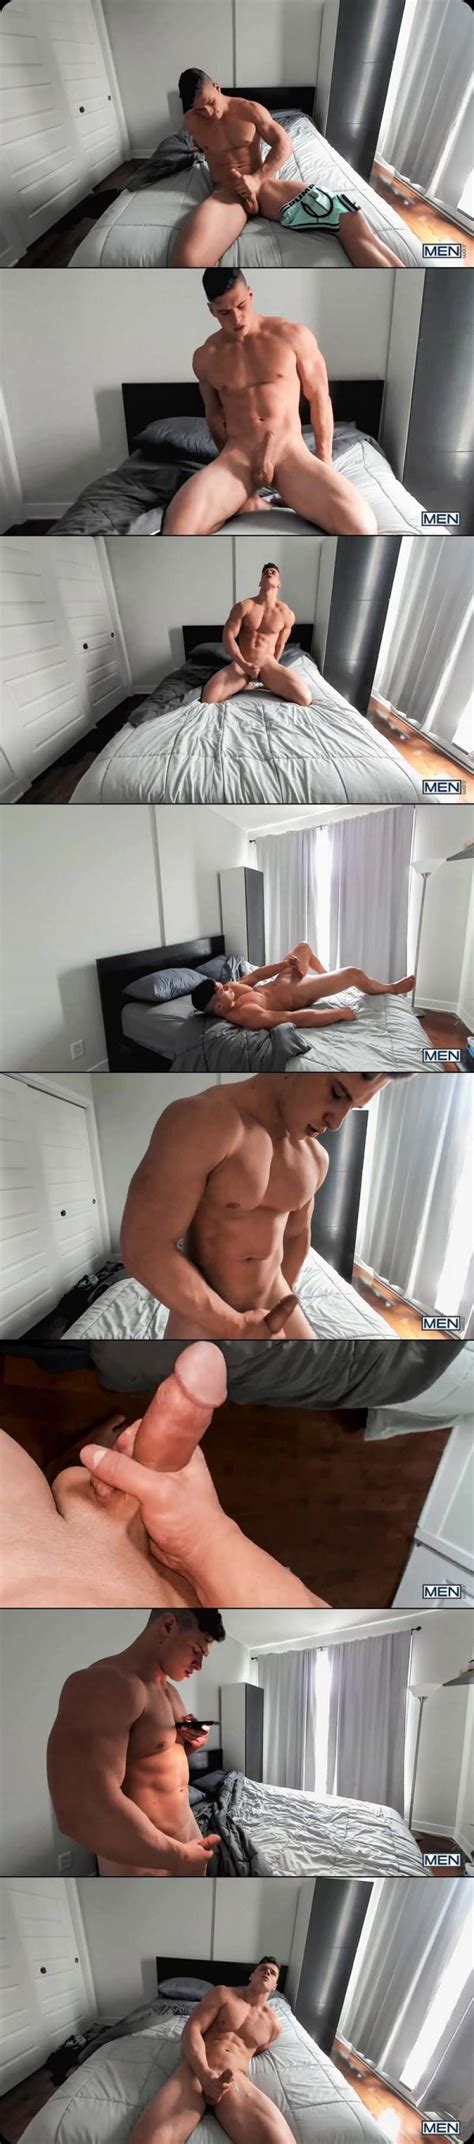 Daily Squirt Daily Gay Sex Videos Pictures And News Page 80